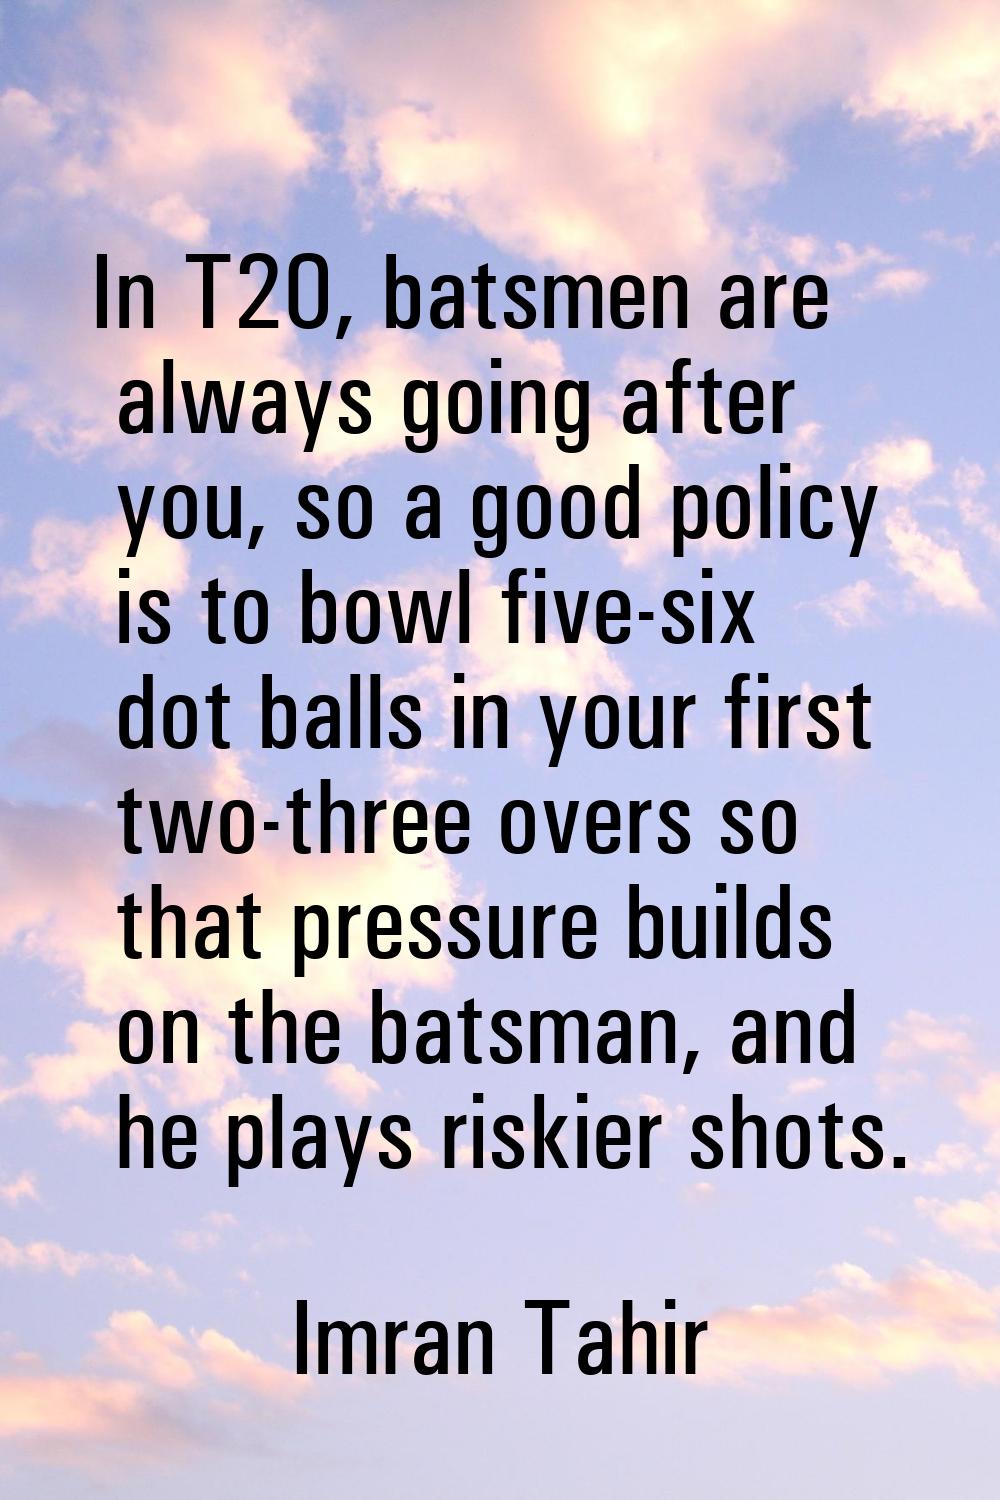 In T20, batsmen are always going after you, so a good policy is to bowl five-six dot balls in your 